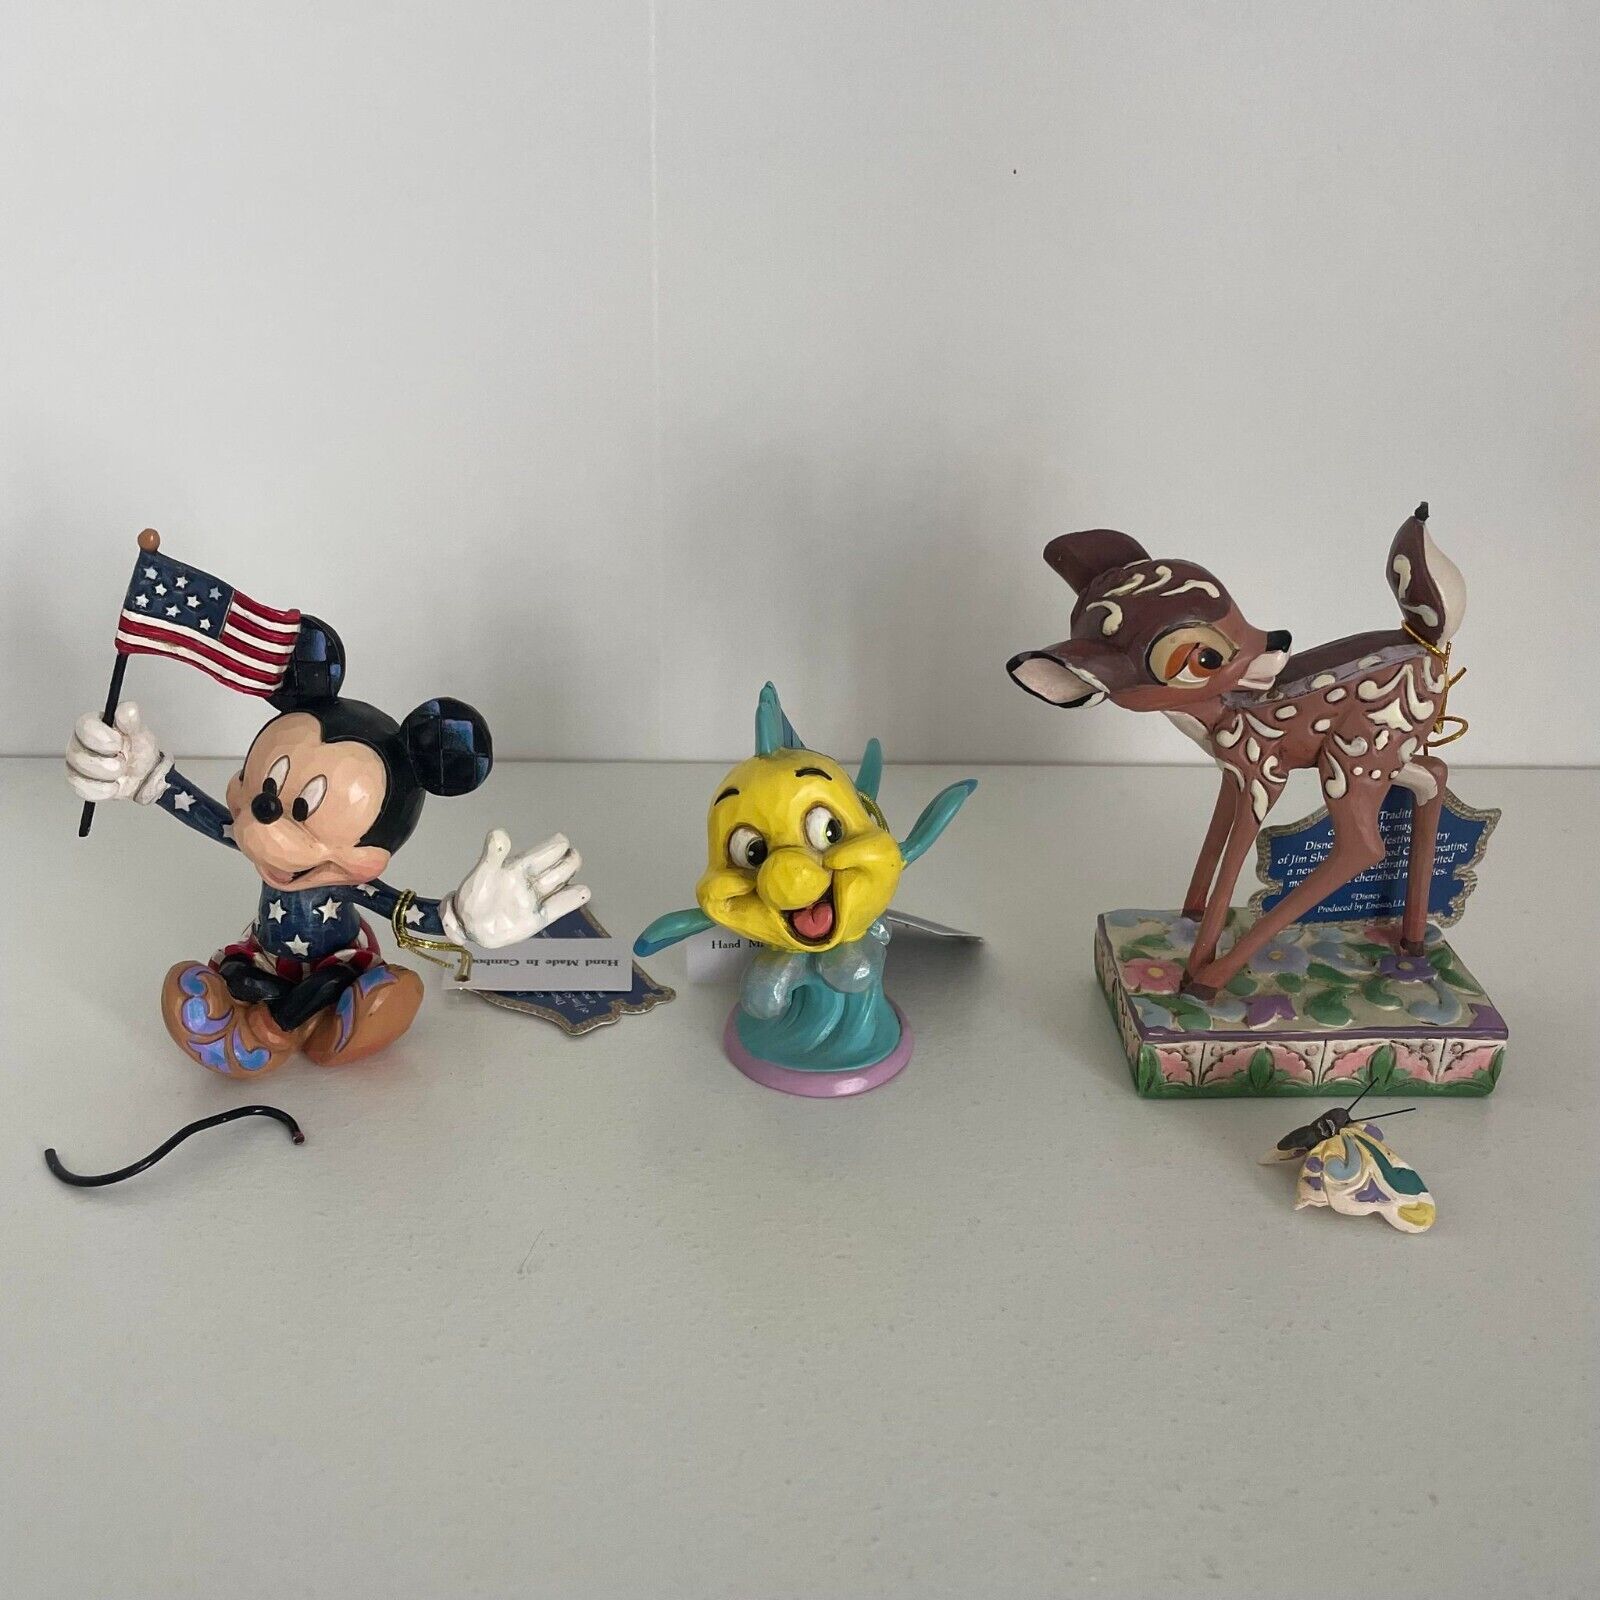 Disney Traditions Patriotic Mickey, Flounder & Bambi Pack of 3 Figurines Damaged